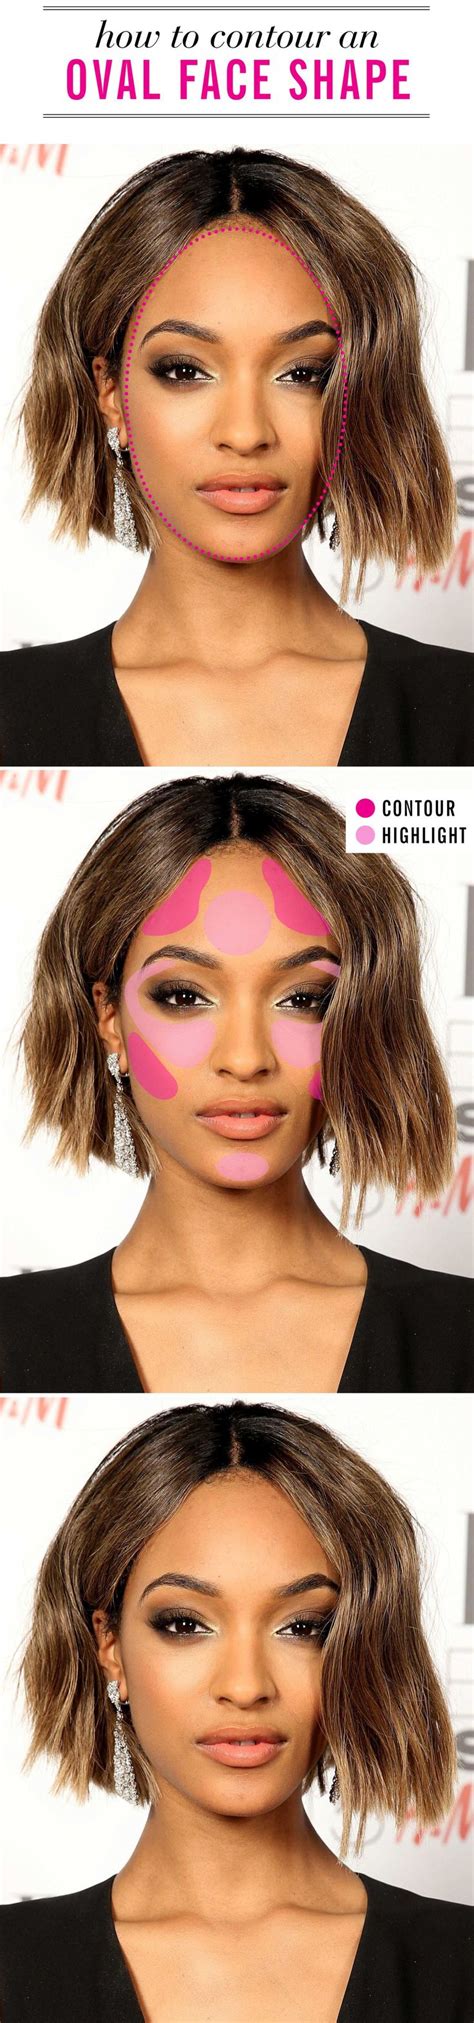 As the most versatile face stylistically, you are a rarity. The Right Way to Contour for Your Face Shape | Oval face shapes, Face shapes, Face shape contour